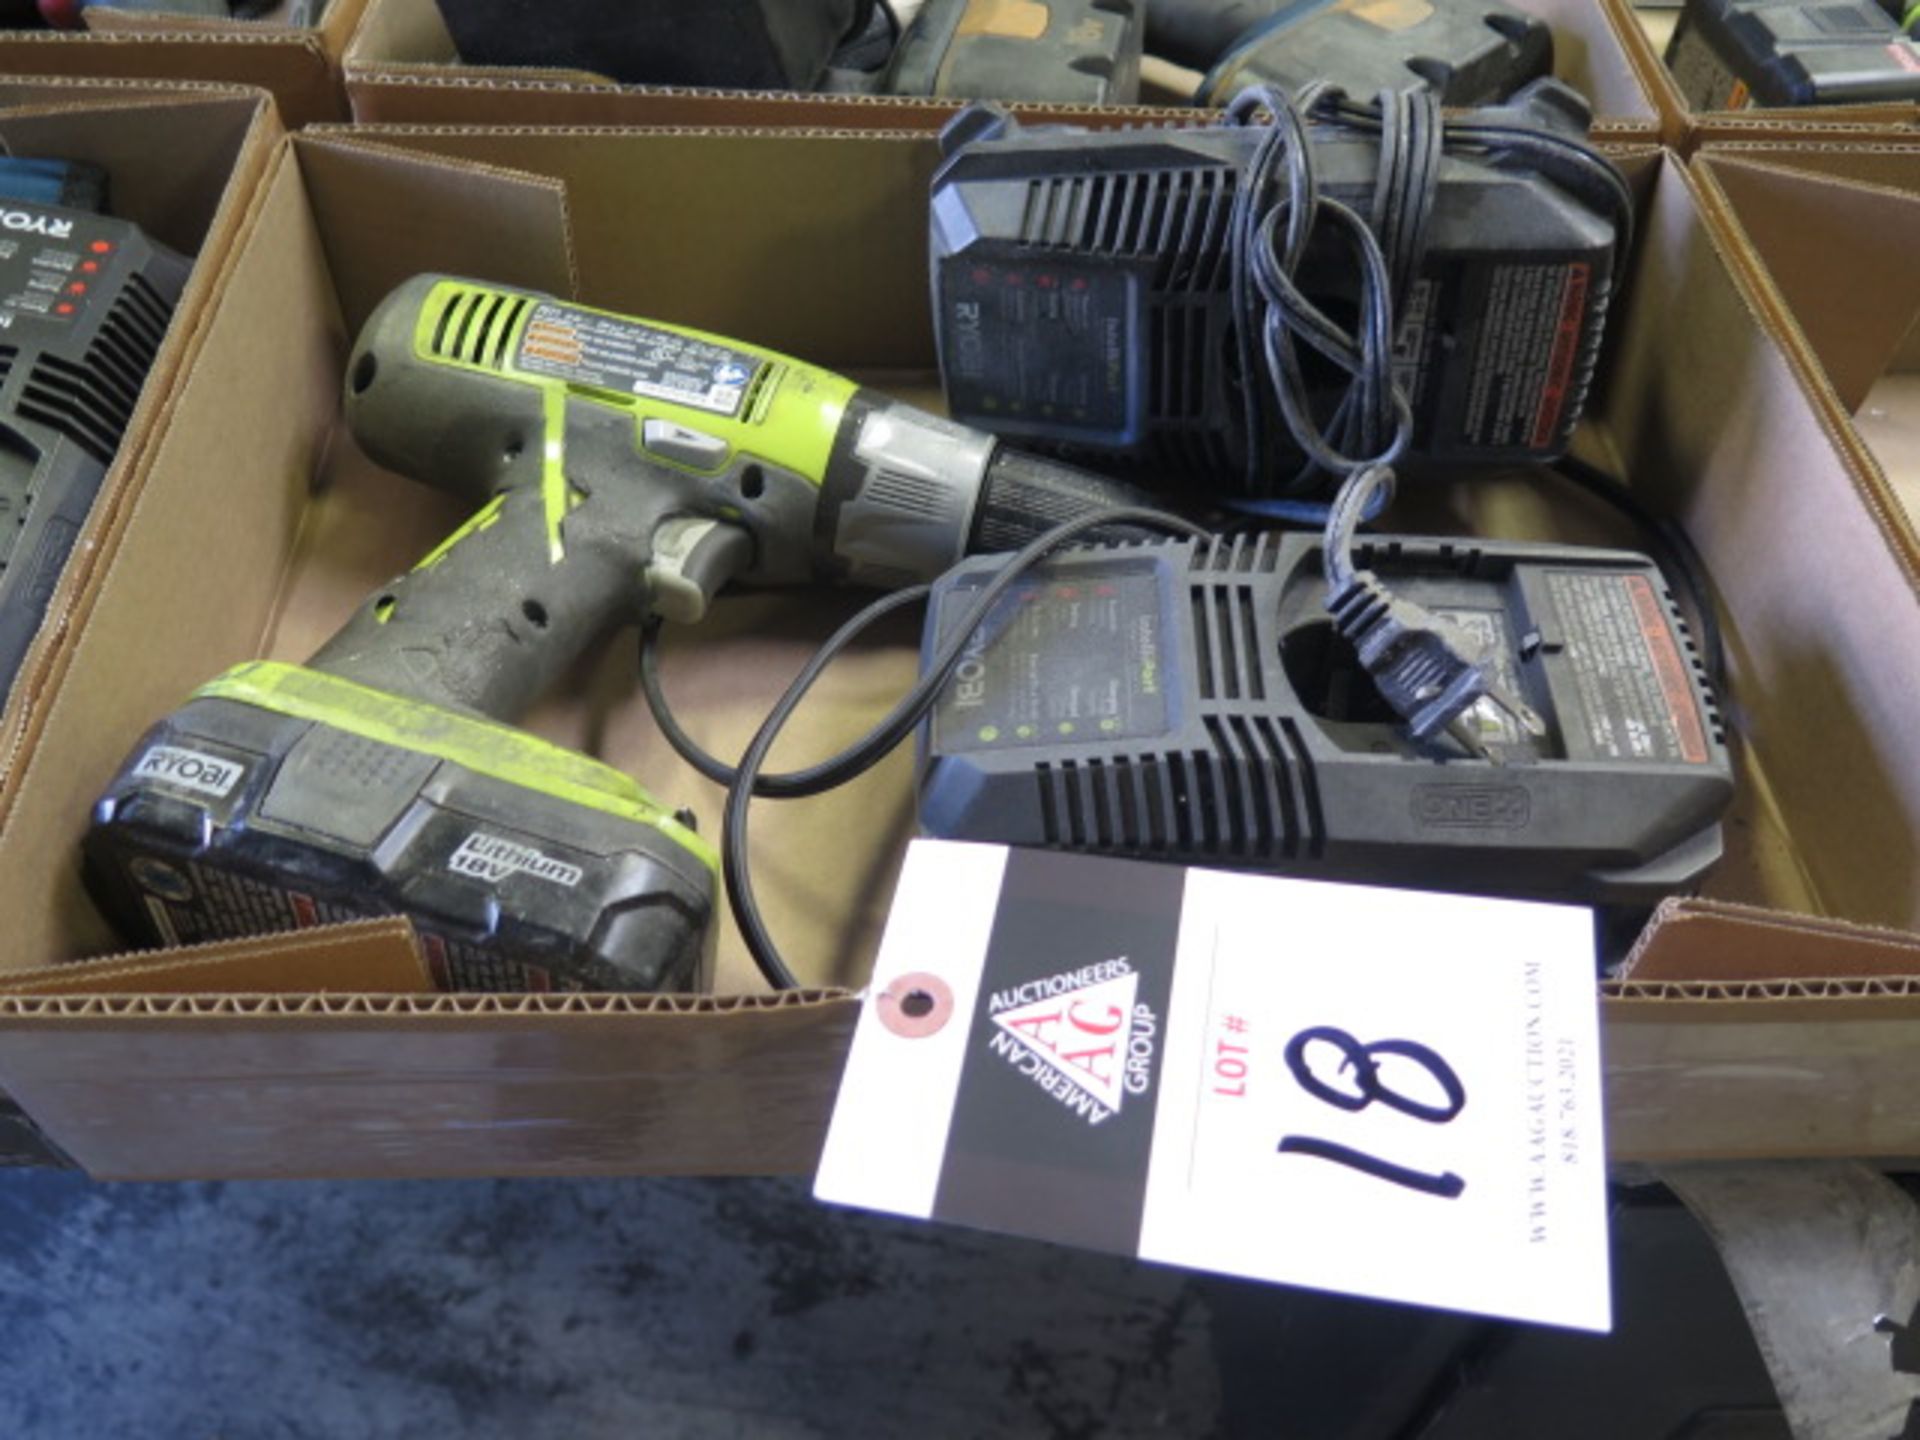 Ryobi 18Volt Cordless Drill w/ Charger (SOLD AS-IS - NO WARRANTY)